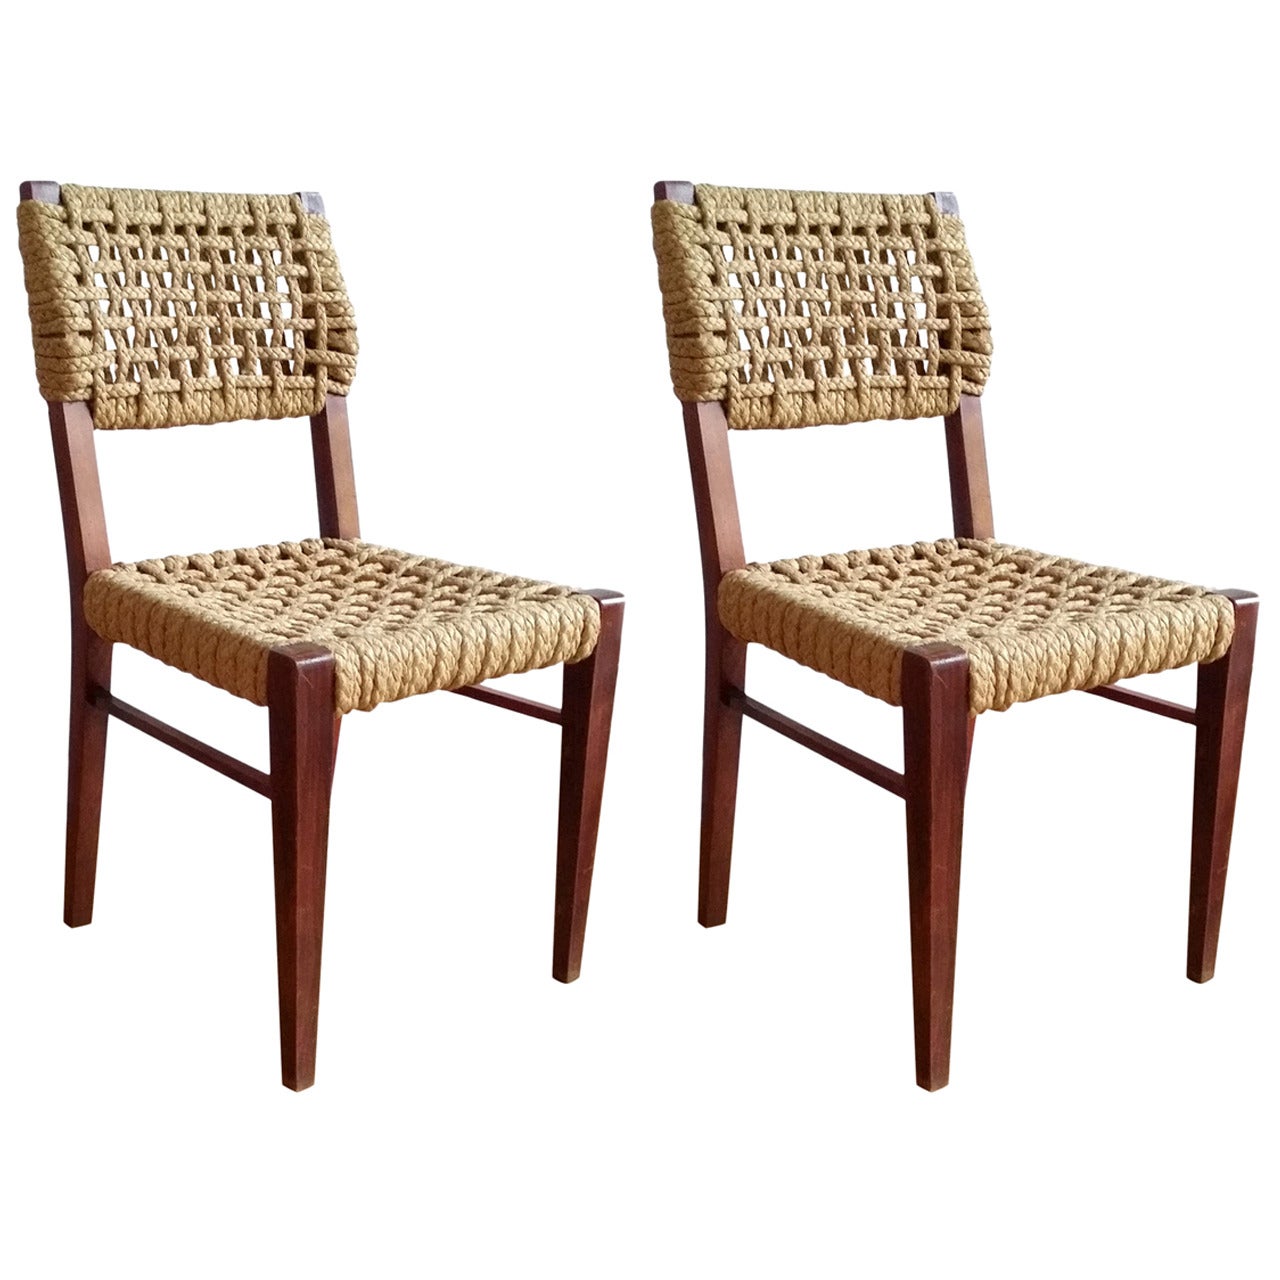 set of 2 Audoux Minet rope dining chairs - France 1960's - Ipso Facto